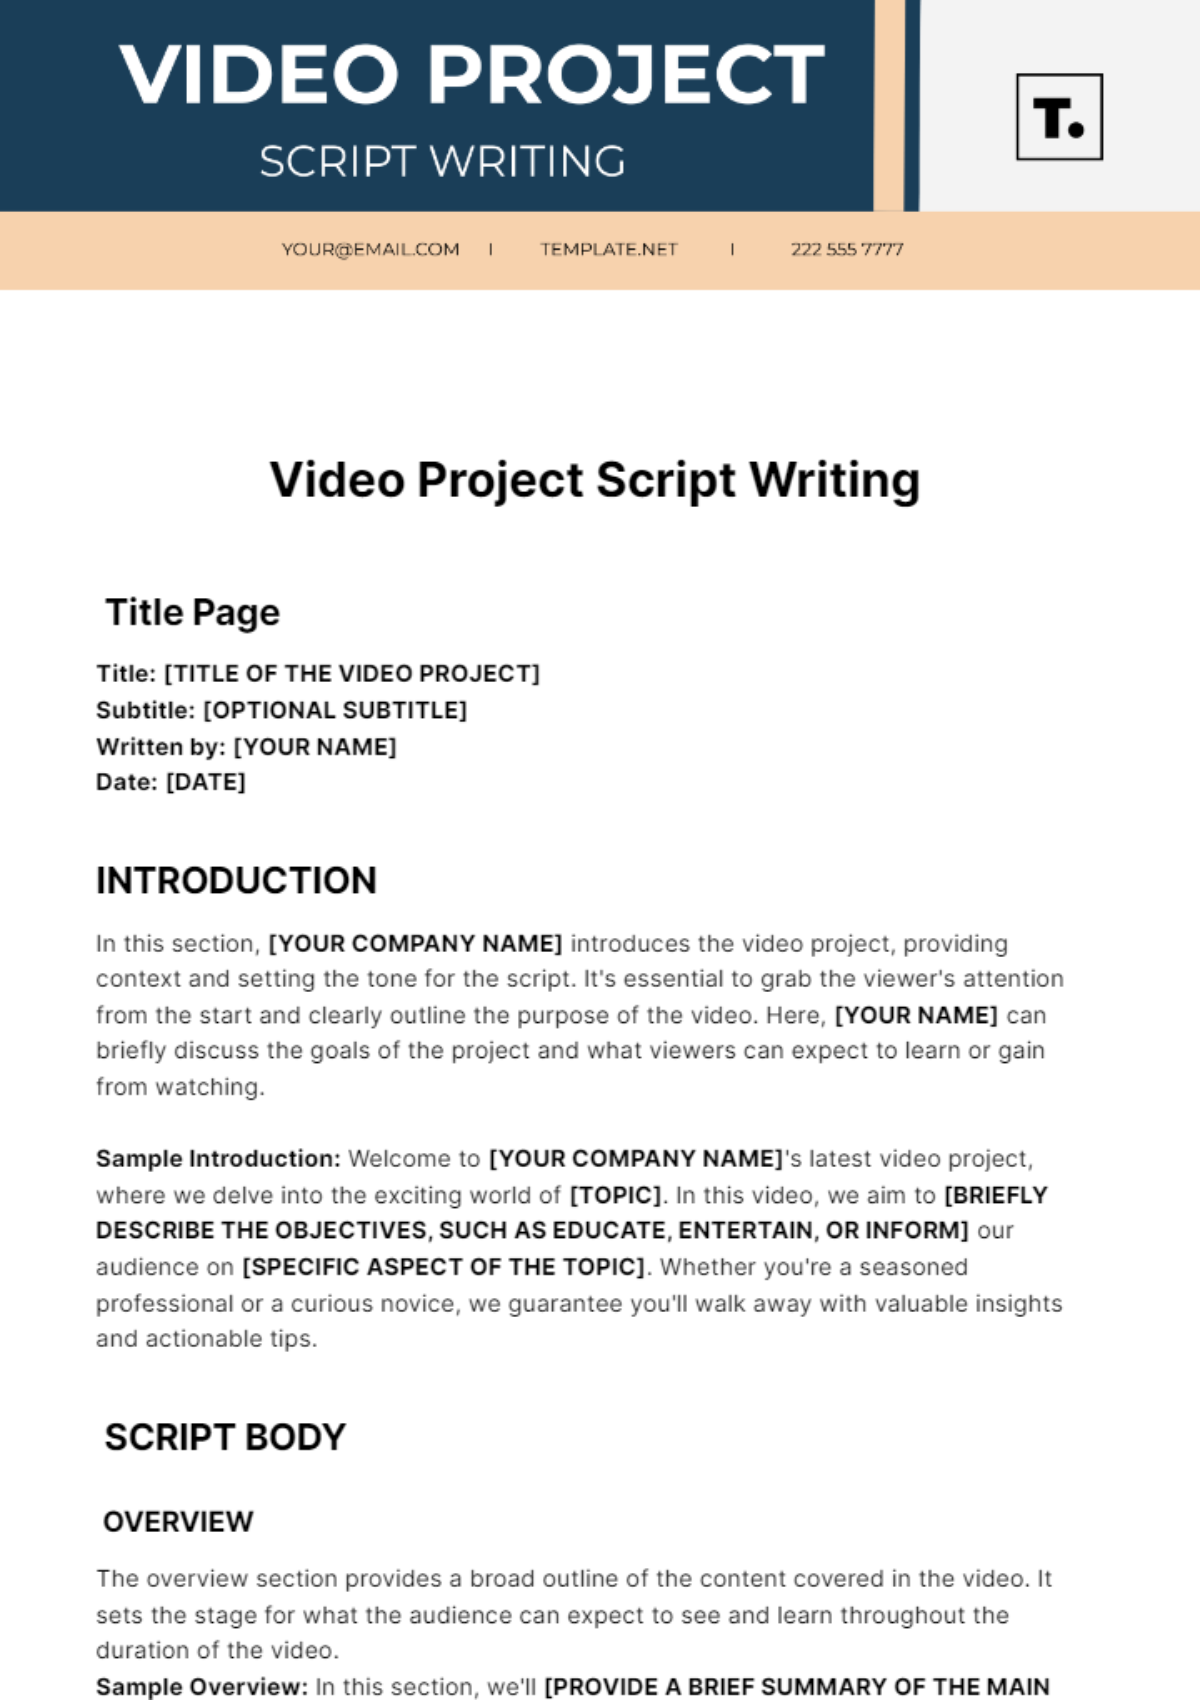 Free Video Project Script Writing Template